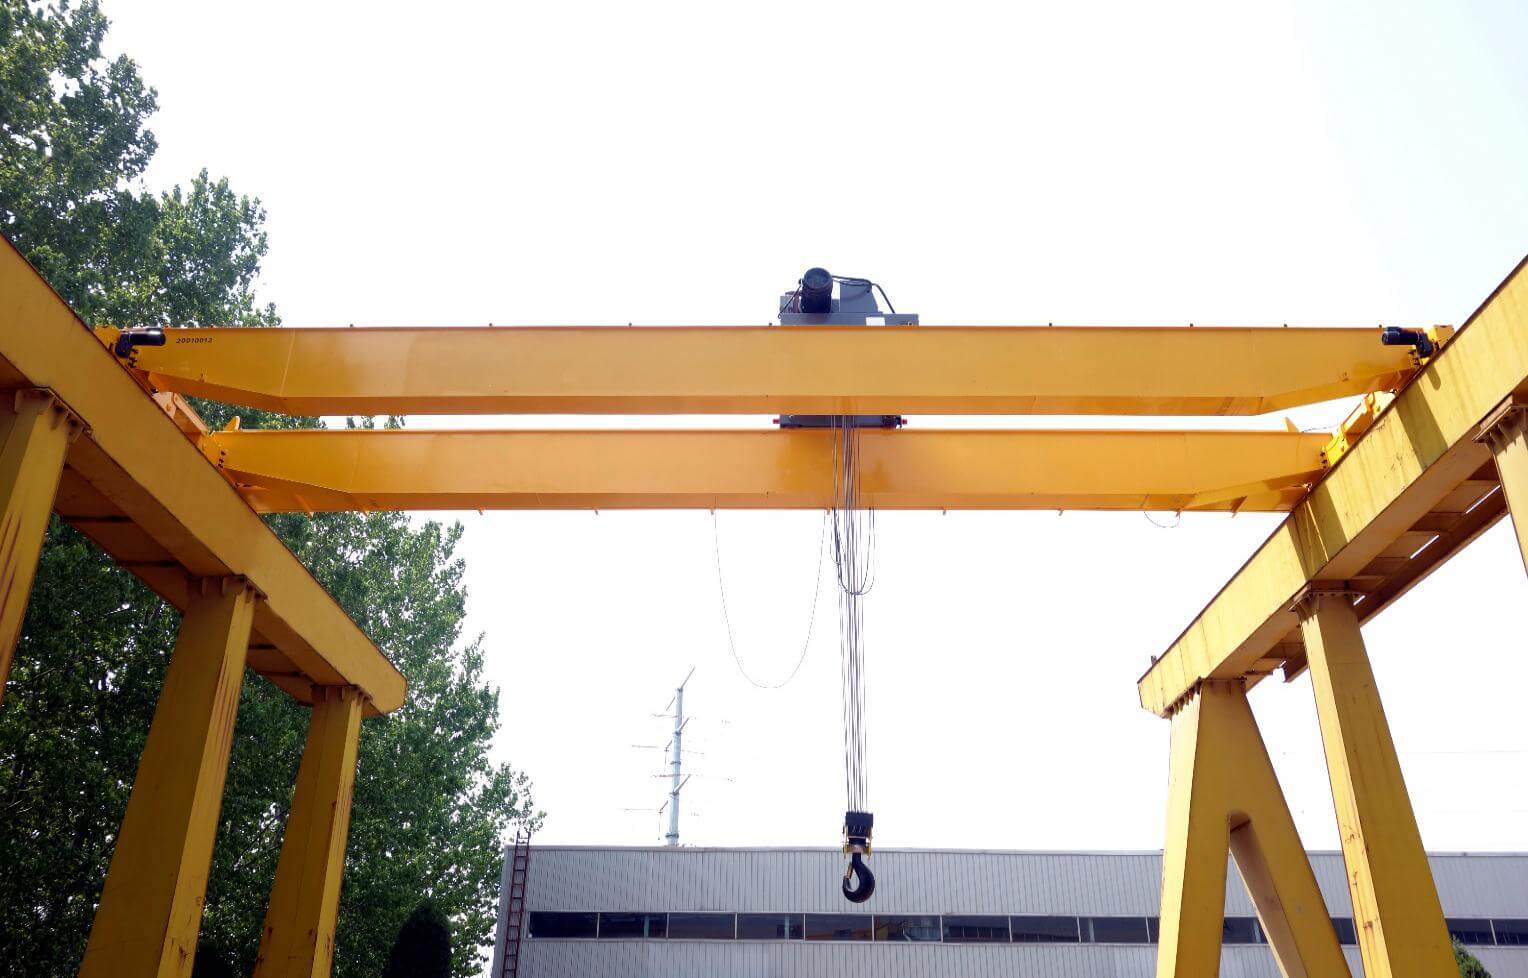 Quote for Europe type 25t double girder overhead crane-22.jpg